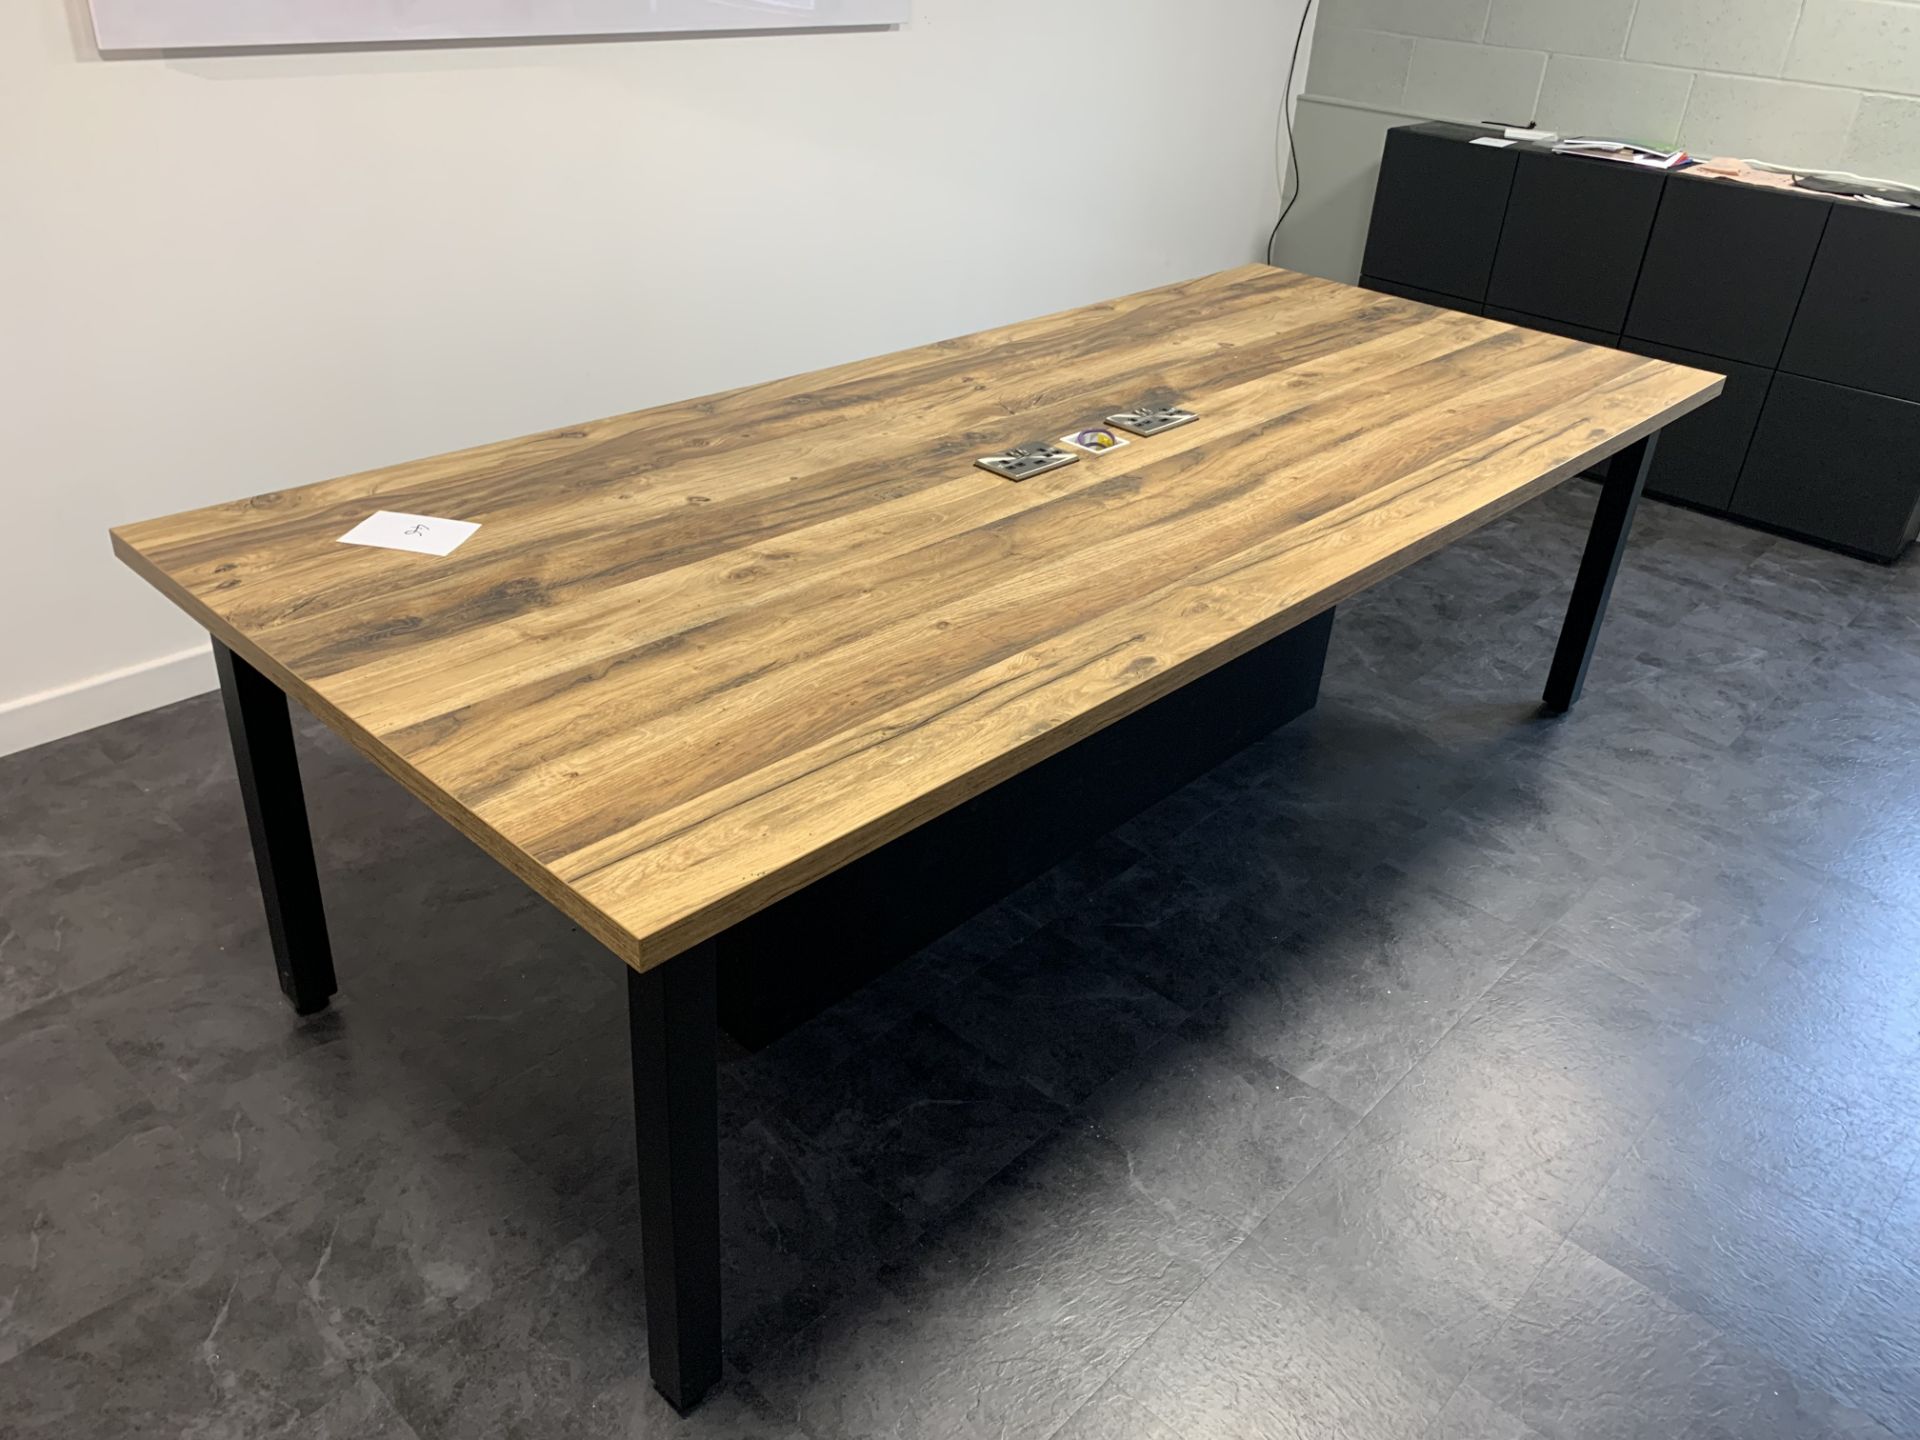 Wood effect Boardroom table - Image 2 of 2